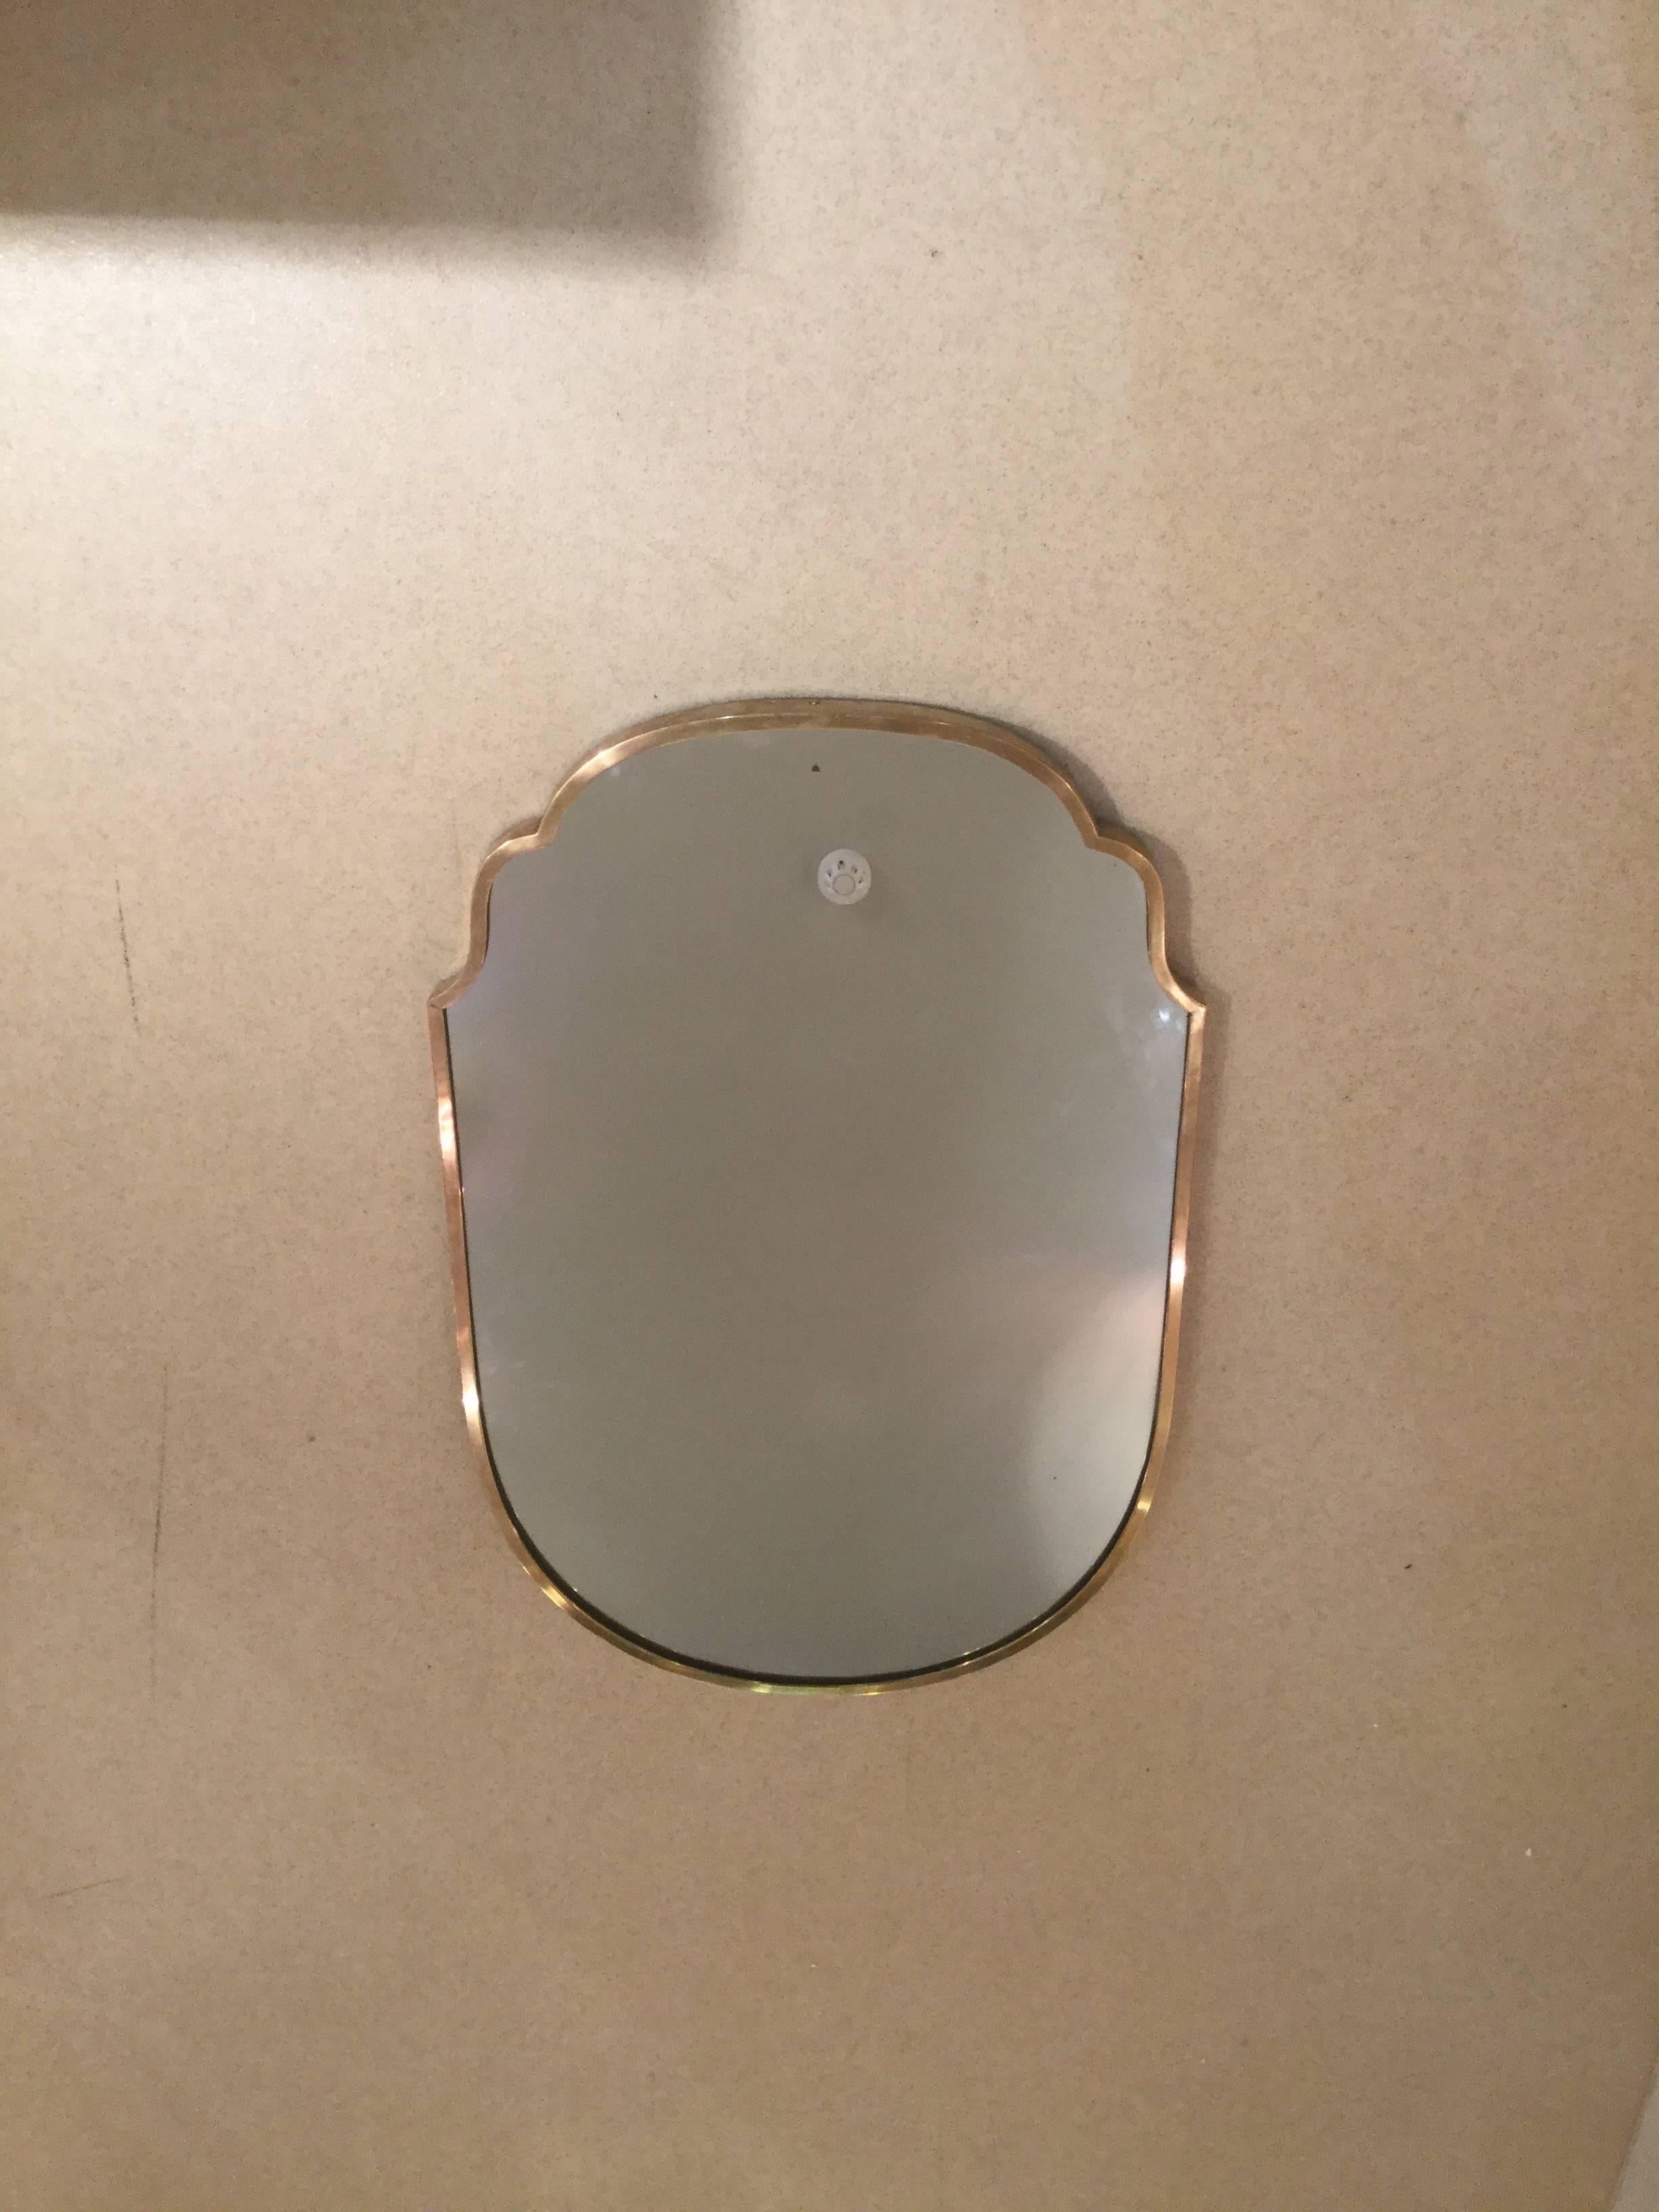 A pair of 1960s mirror in the shape of a shield with a brass frame.
In good condition.